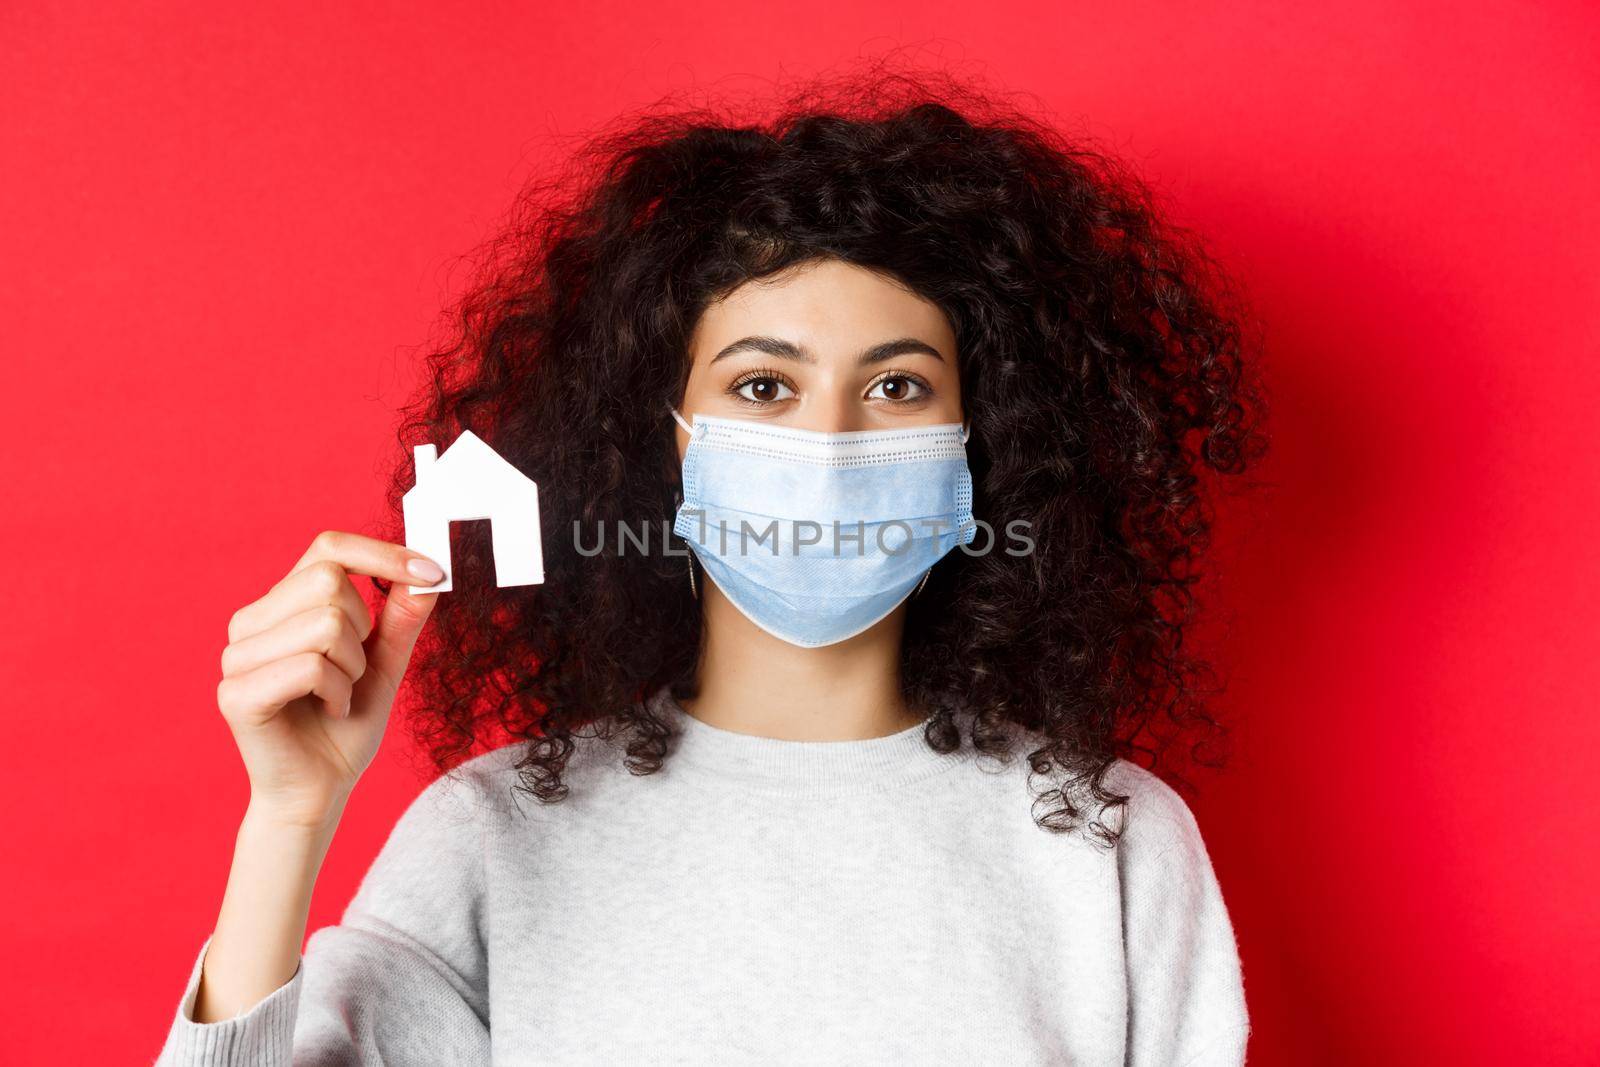 Real estate and covid-19 concept. Excited woman in medical mask showing small paper house cutout, standing on red background.